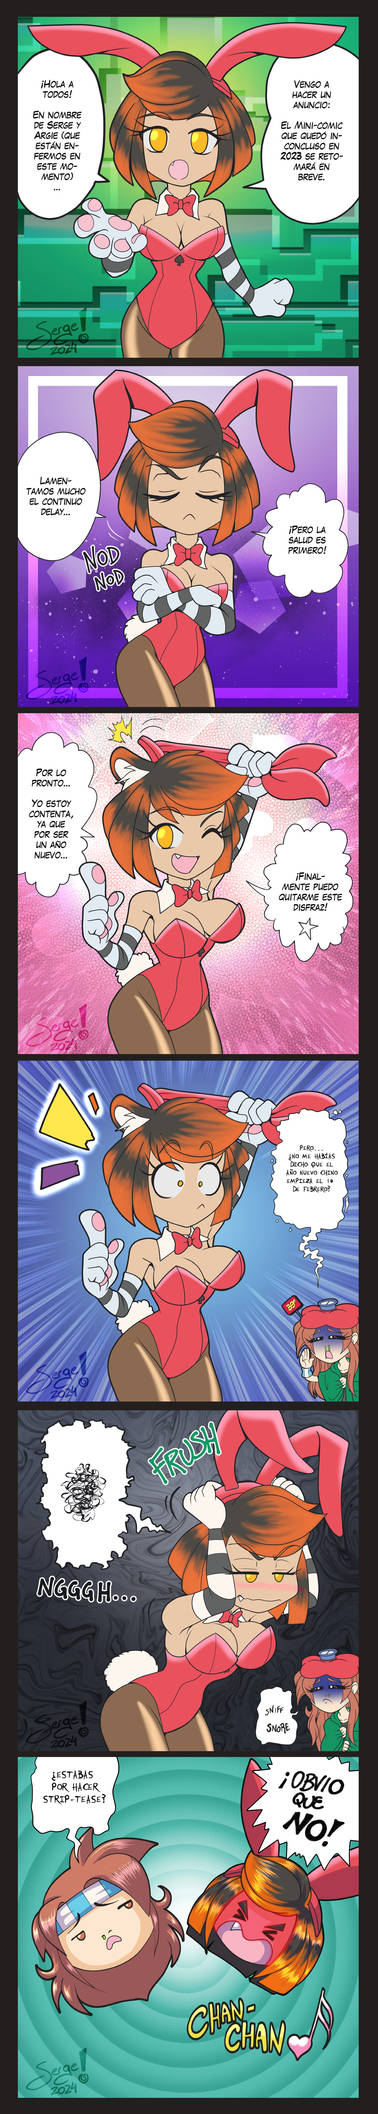 20240122 - We'll be right back - ComicStrip SPA